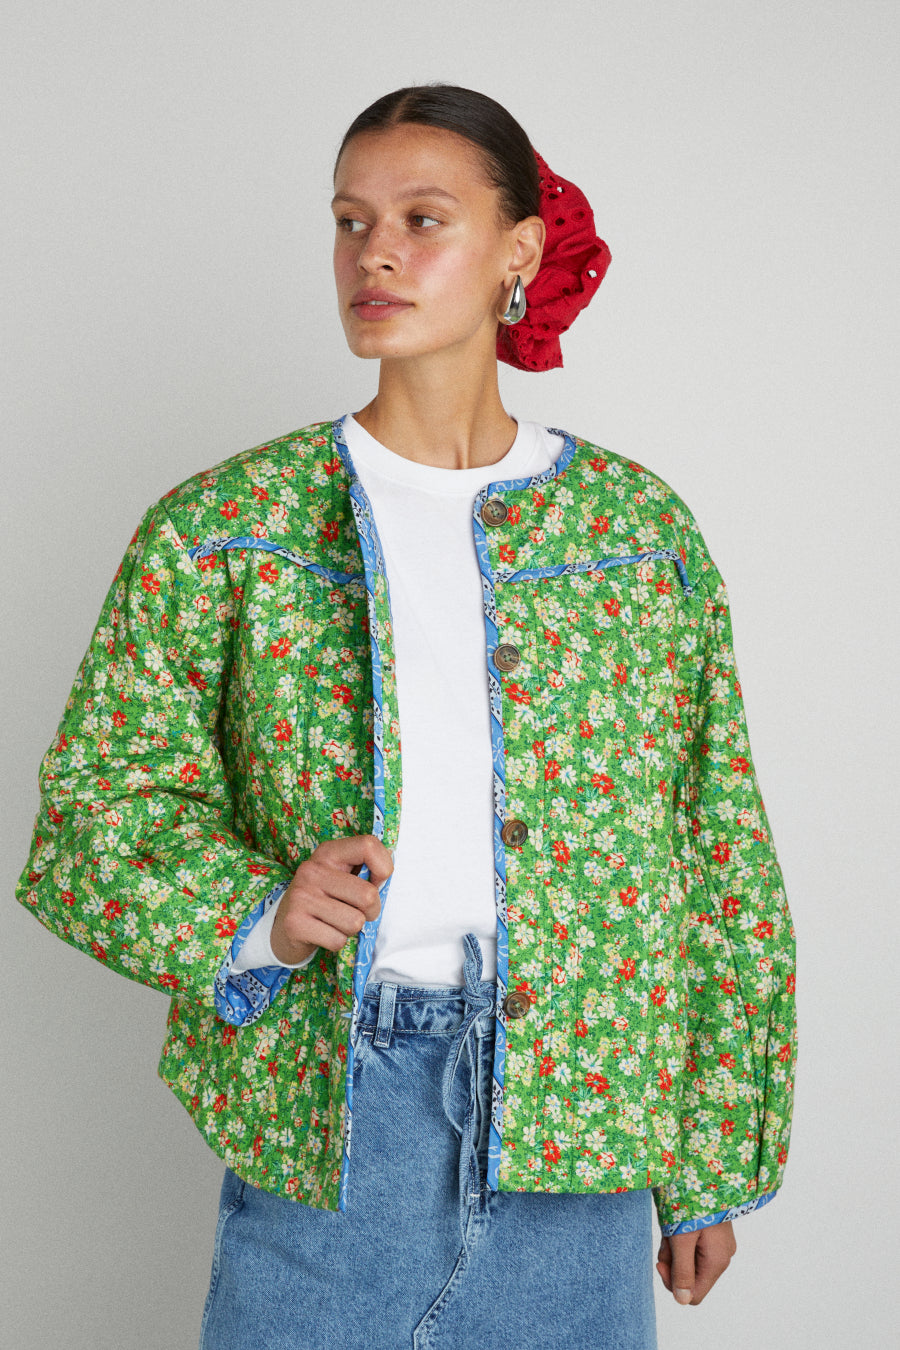 macy quilted jacket - green floral